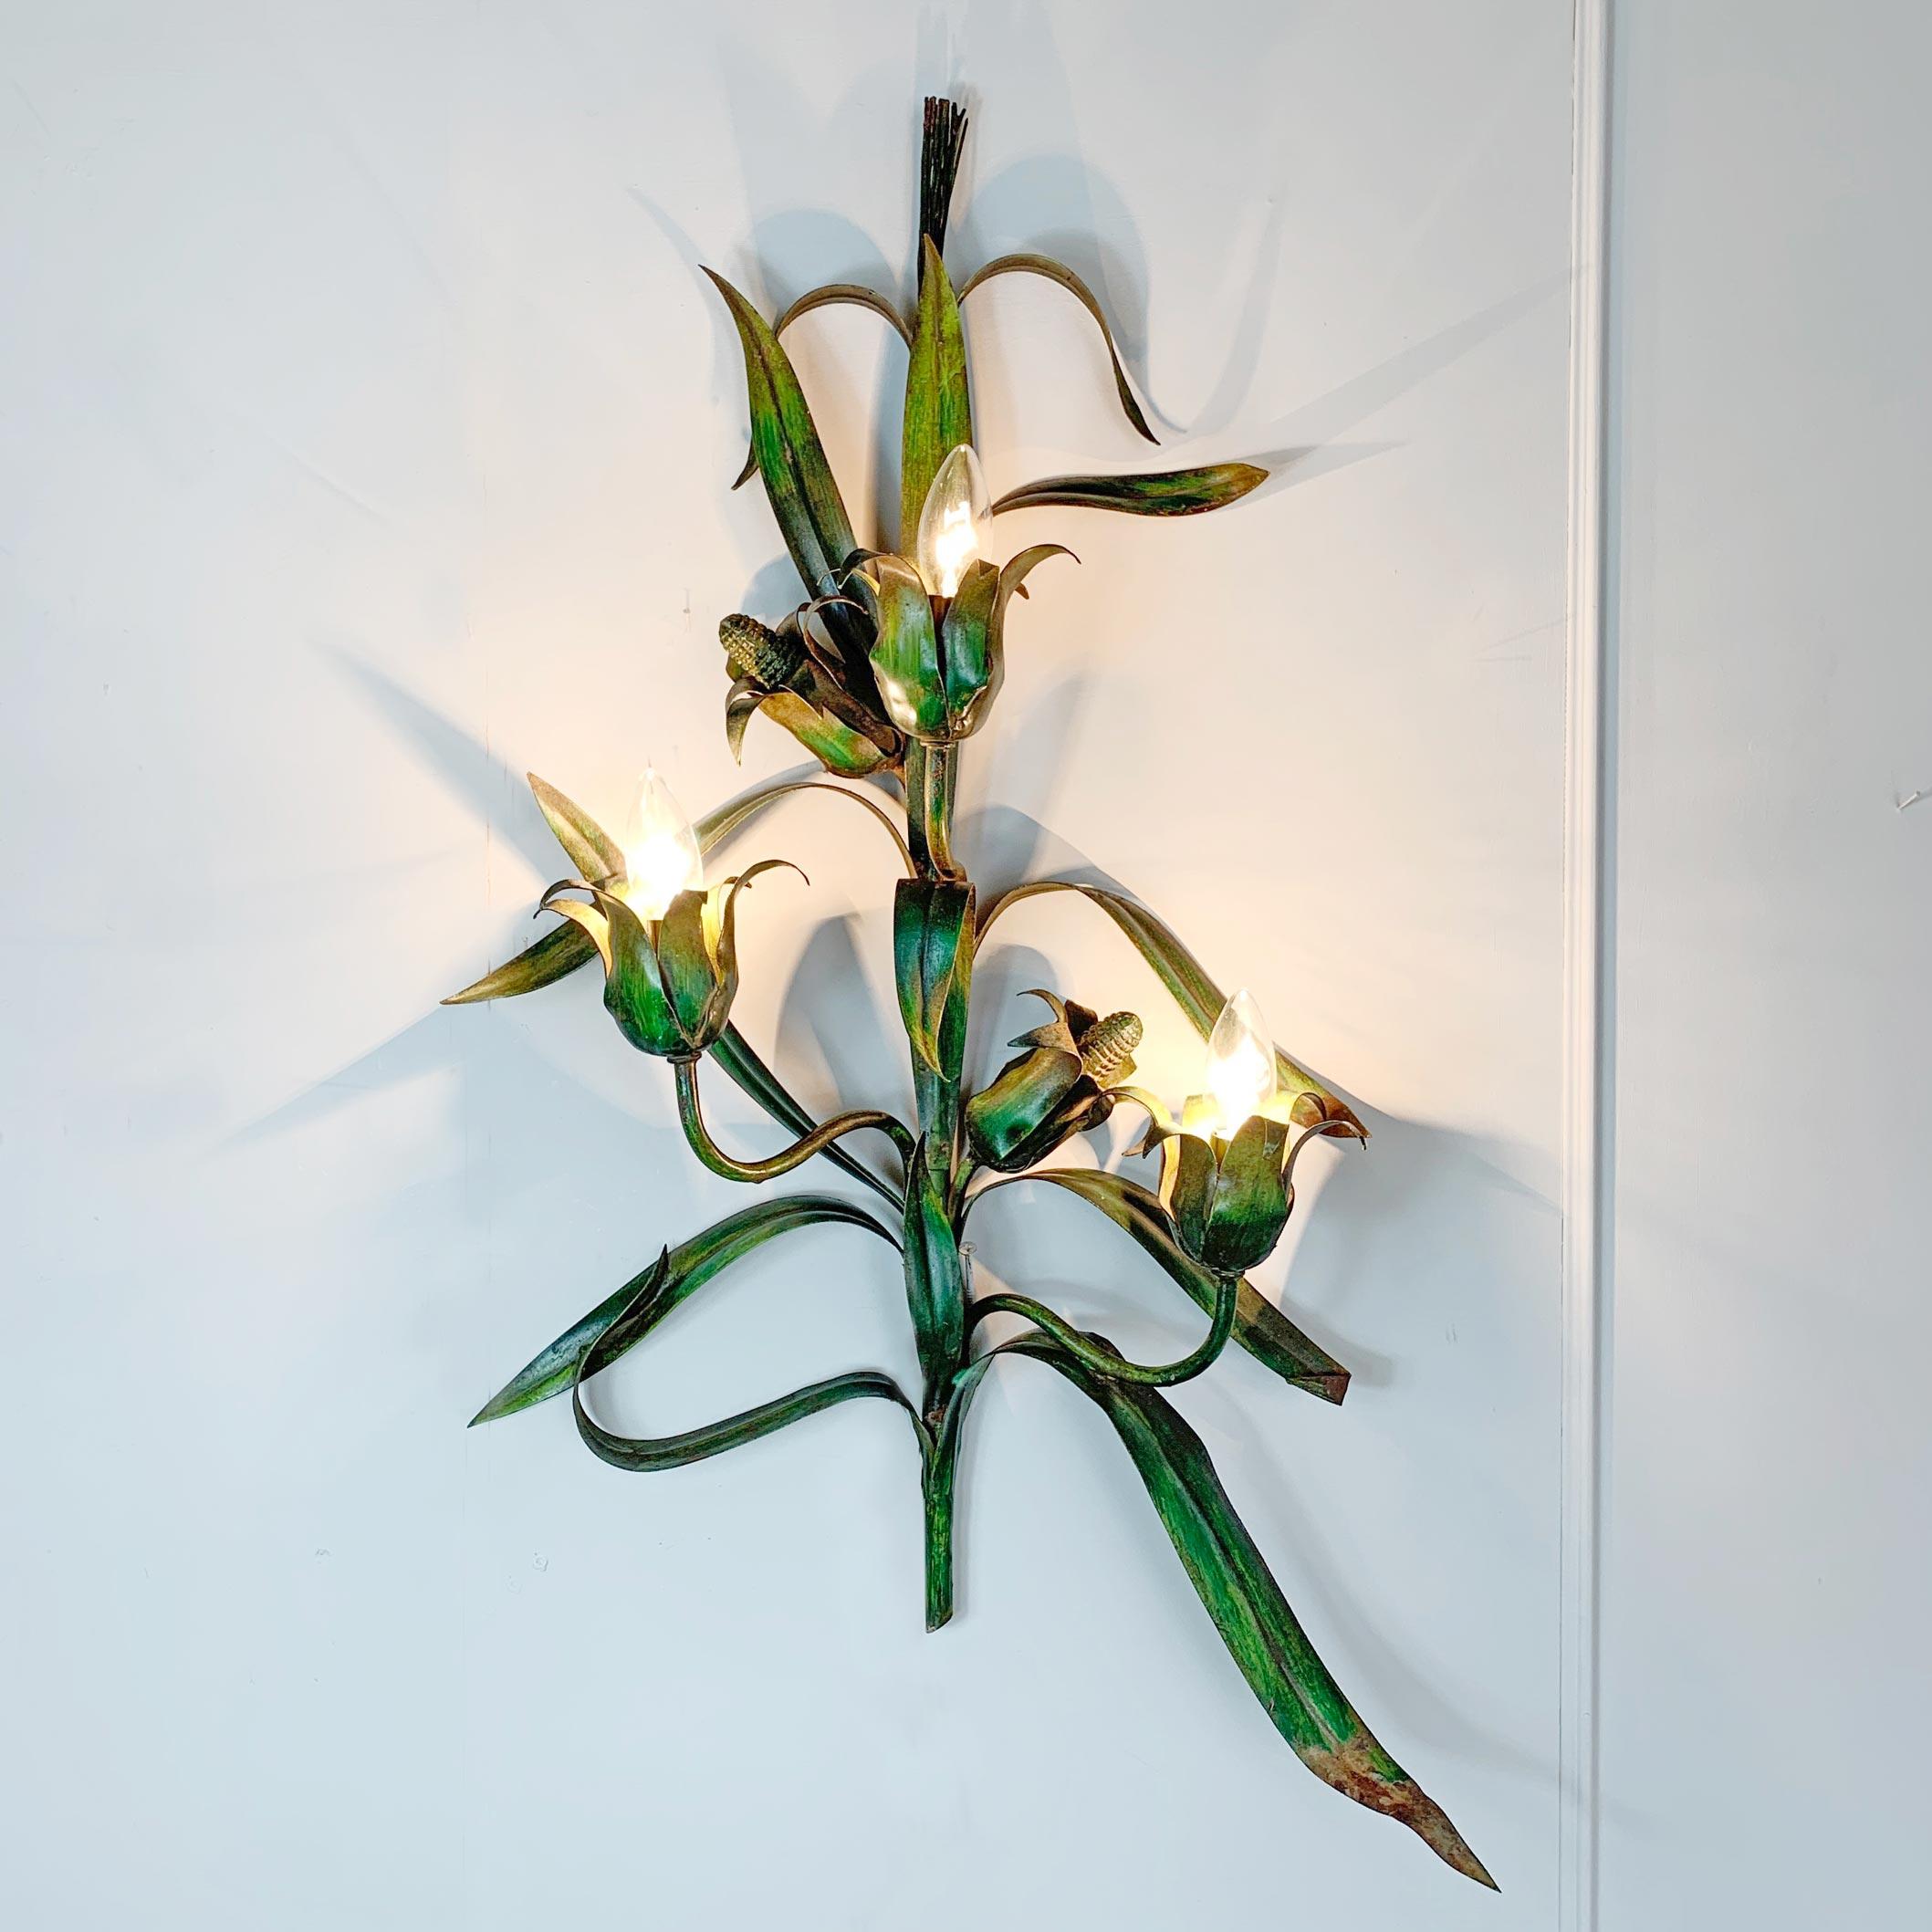 Maize/ corn toleware wall lightslarge maize/ corn toleware wall lights,
1960s, France

These rare and very large wall lights are in the design of maize stems with corn cobs and leaves, tipped with maize seed heads

Measures: 80cm height, 48cm